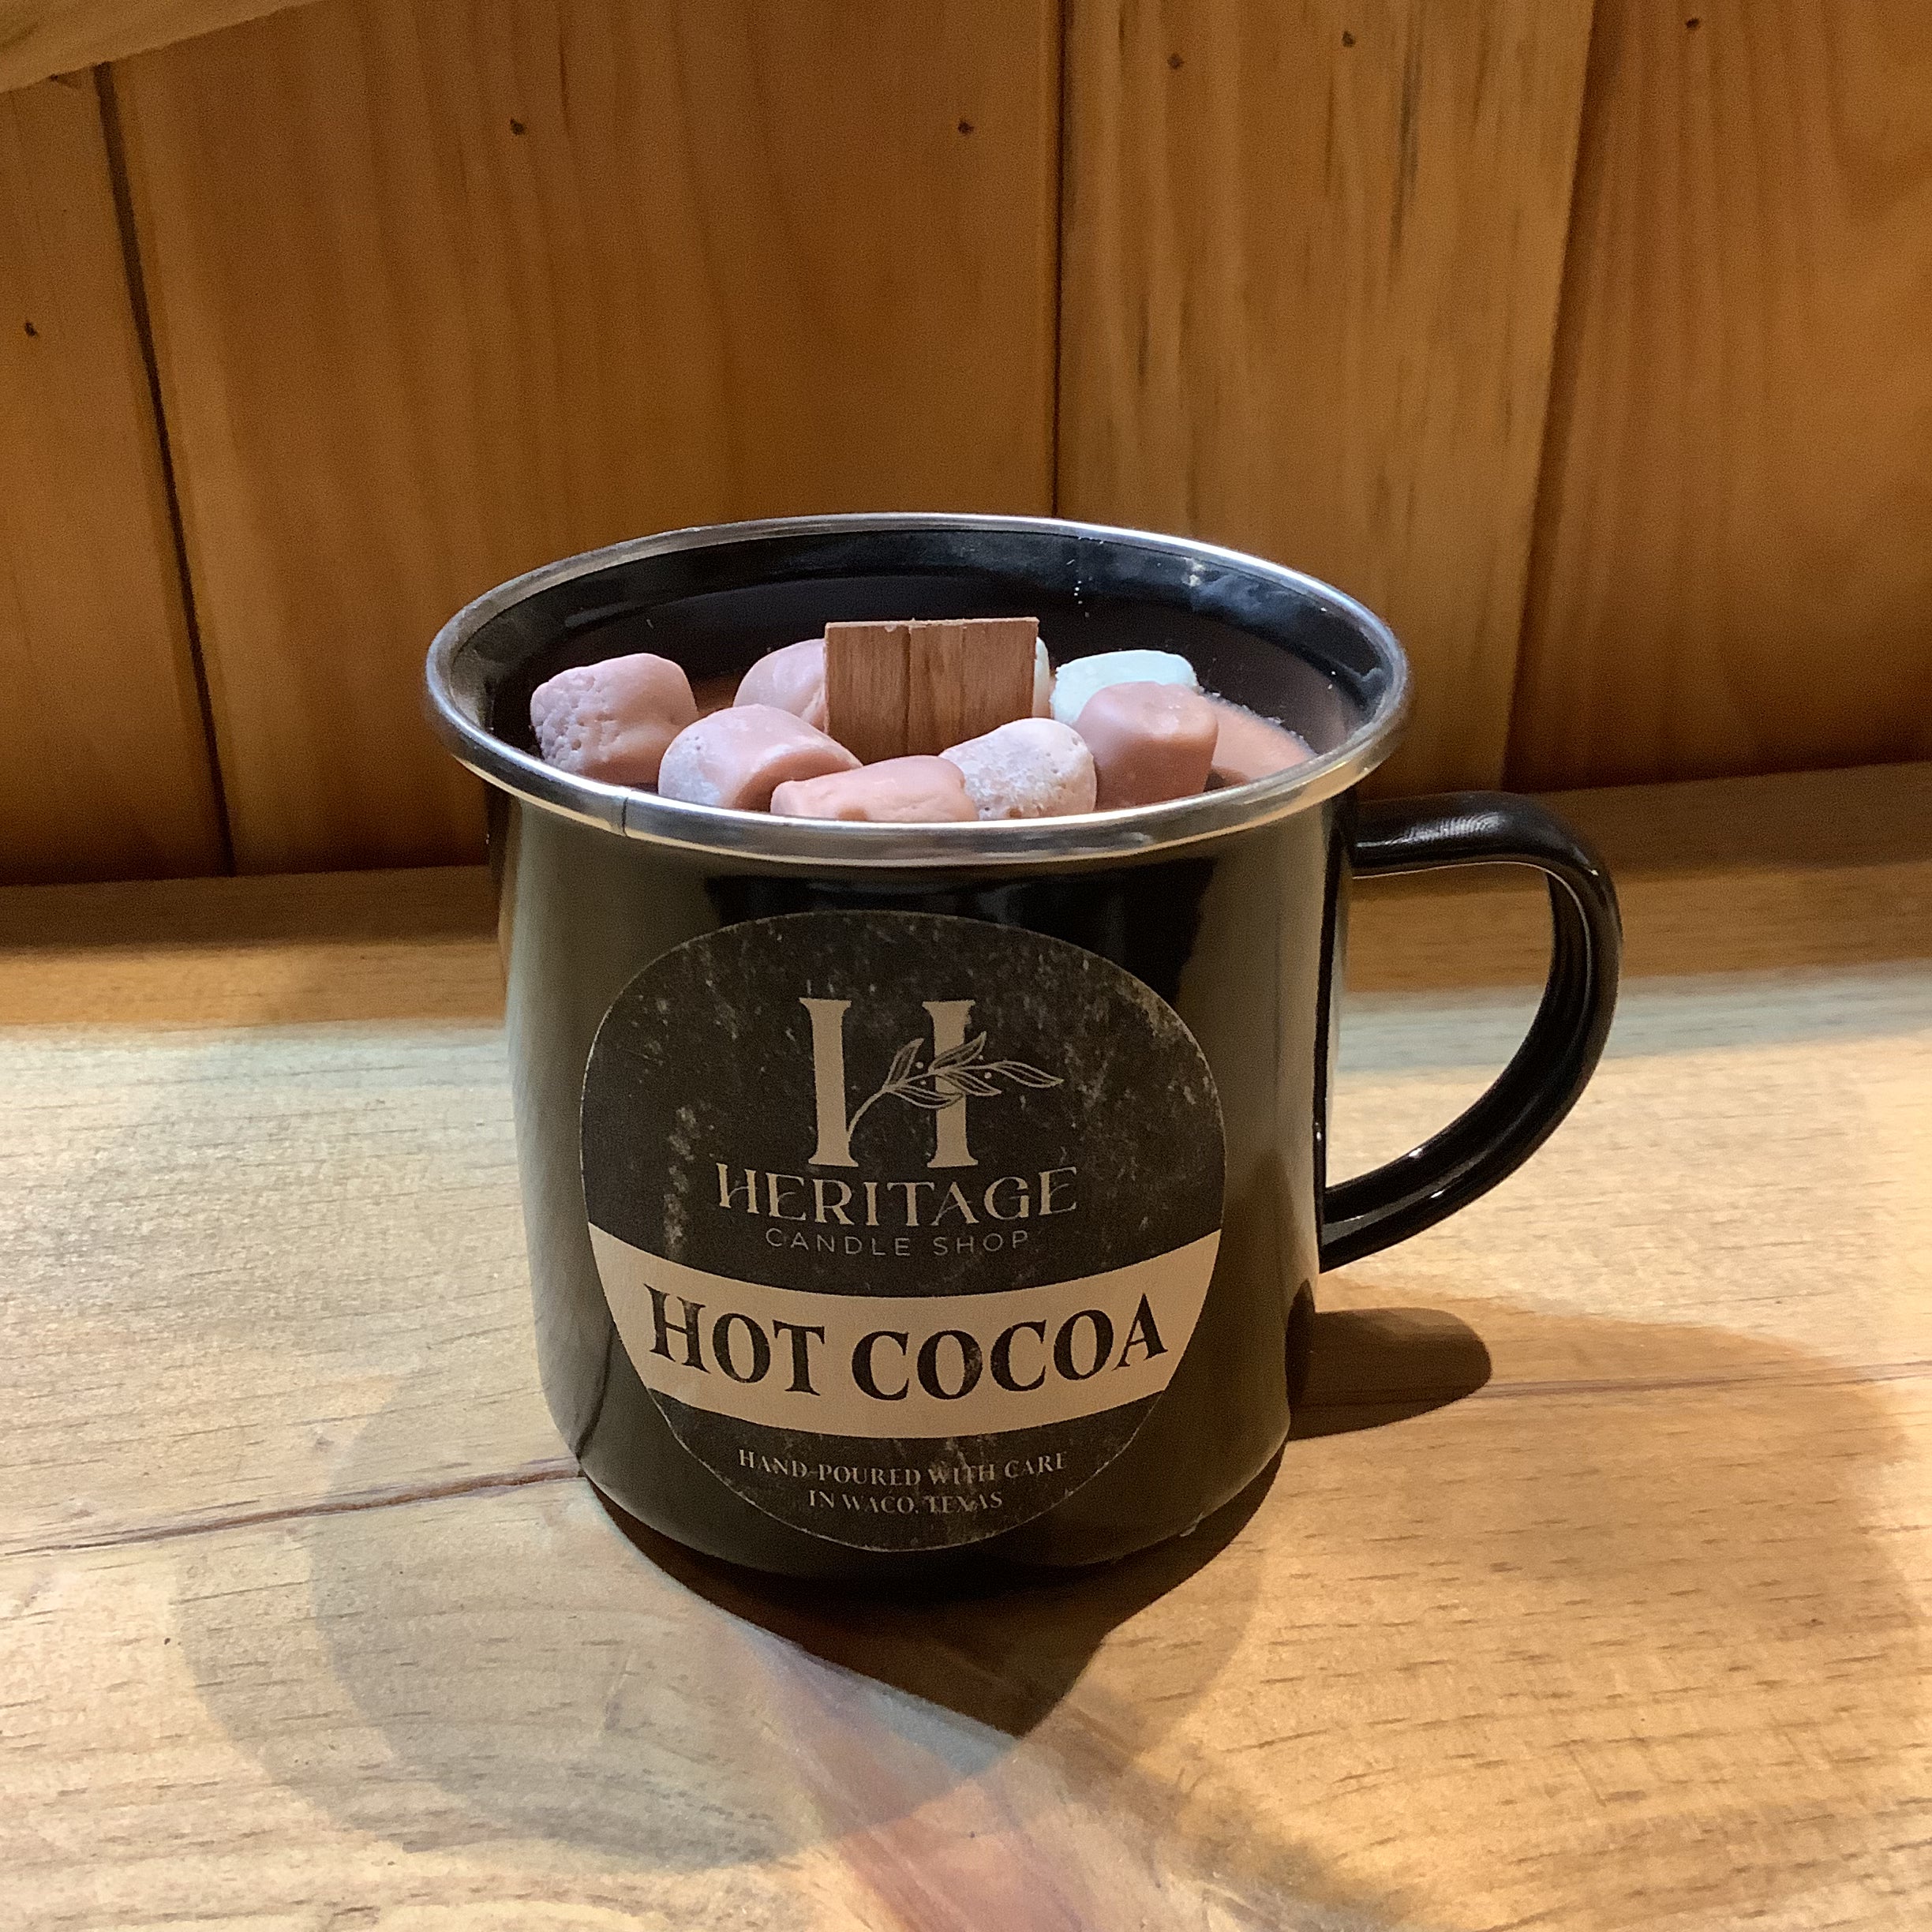 Heritage Candle Shop - Hot Cocoa Tin Cup w/Marshmallows